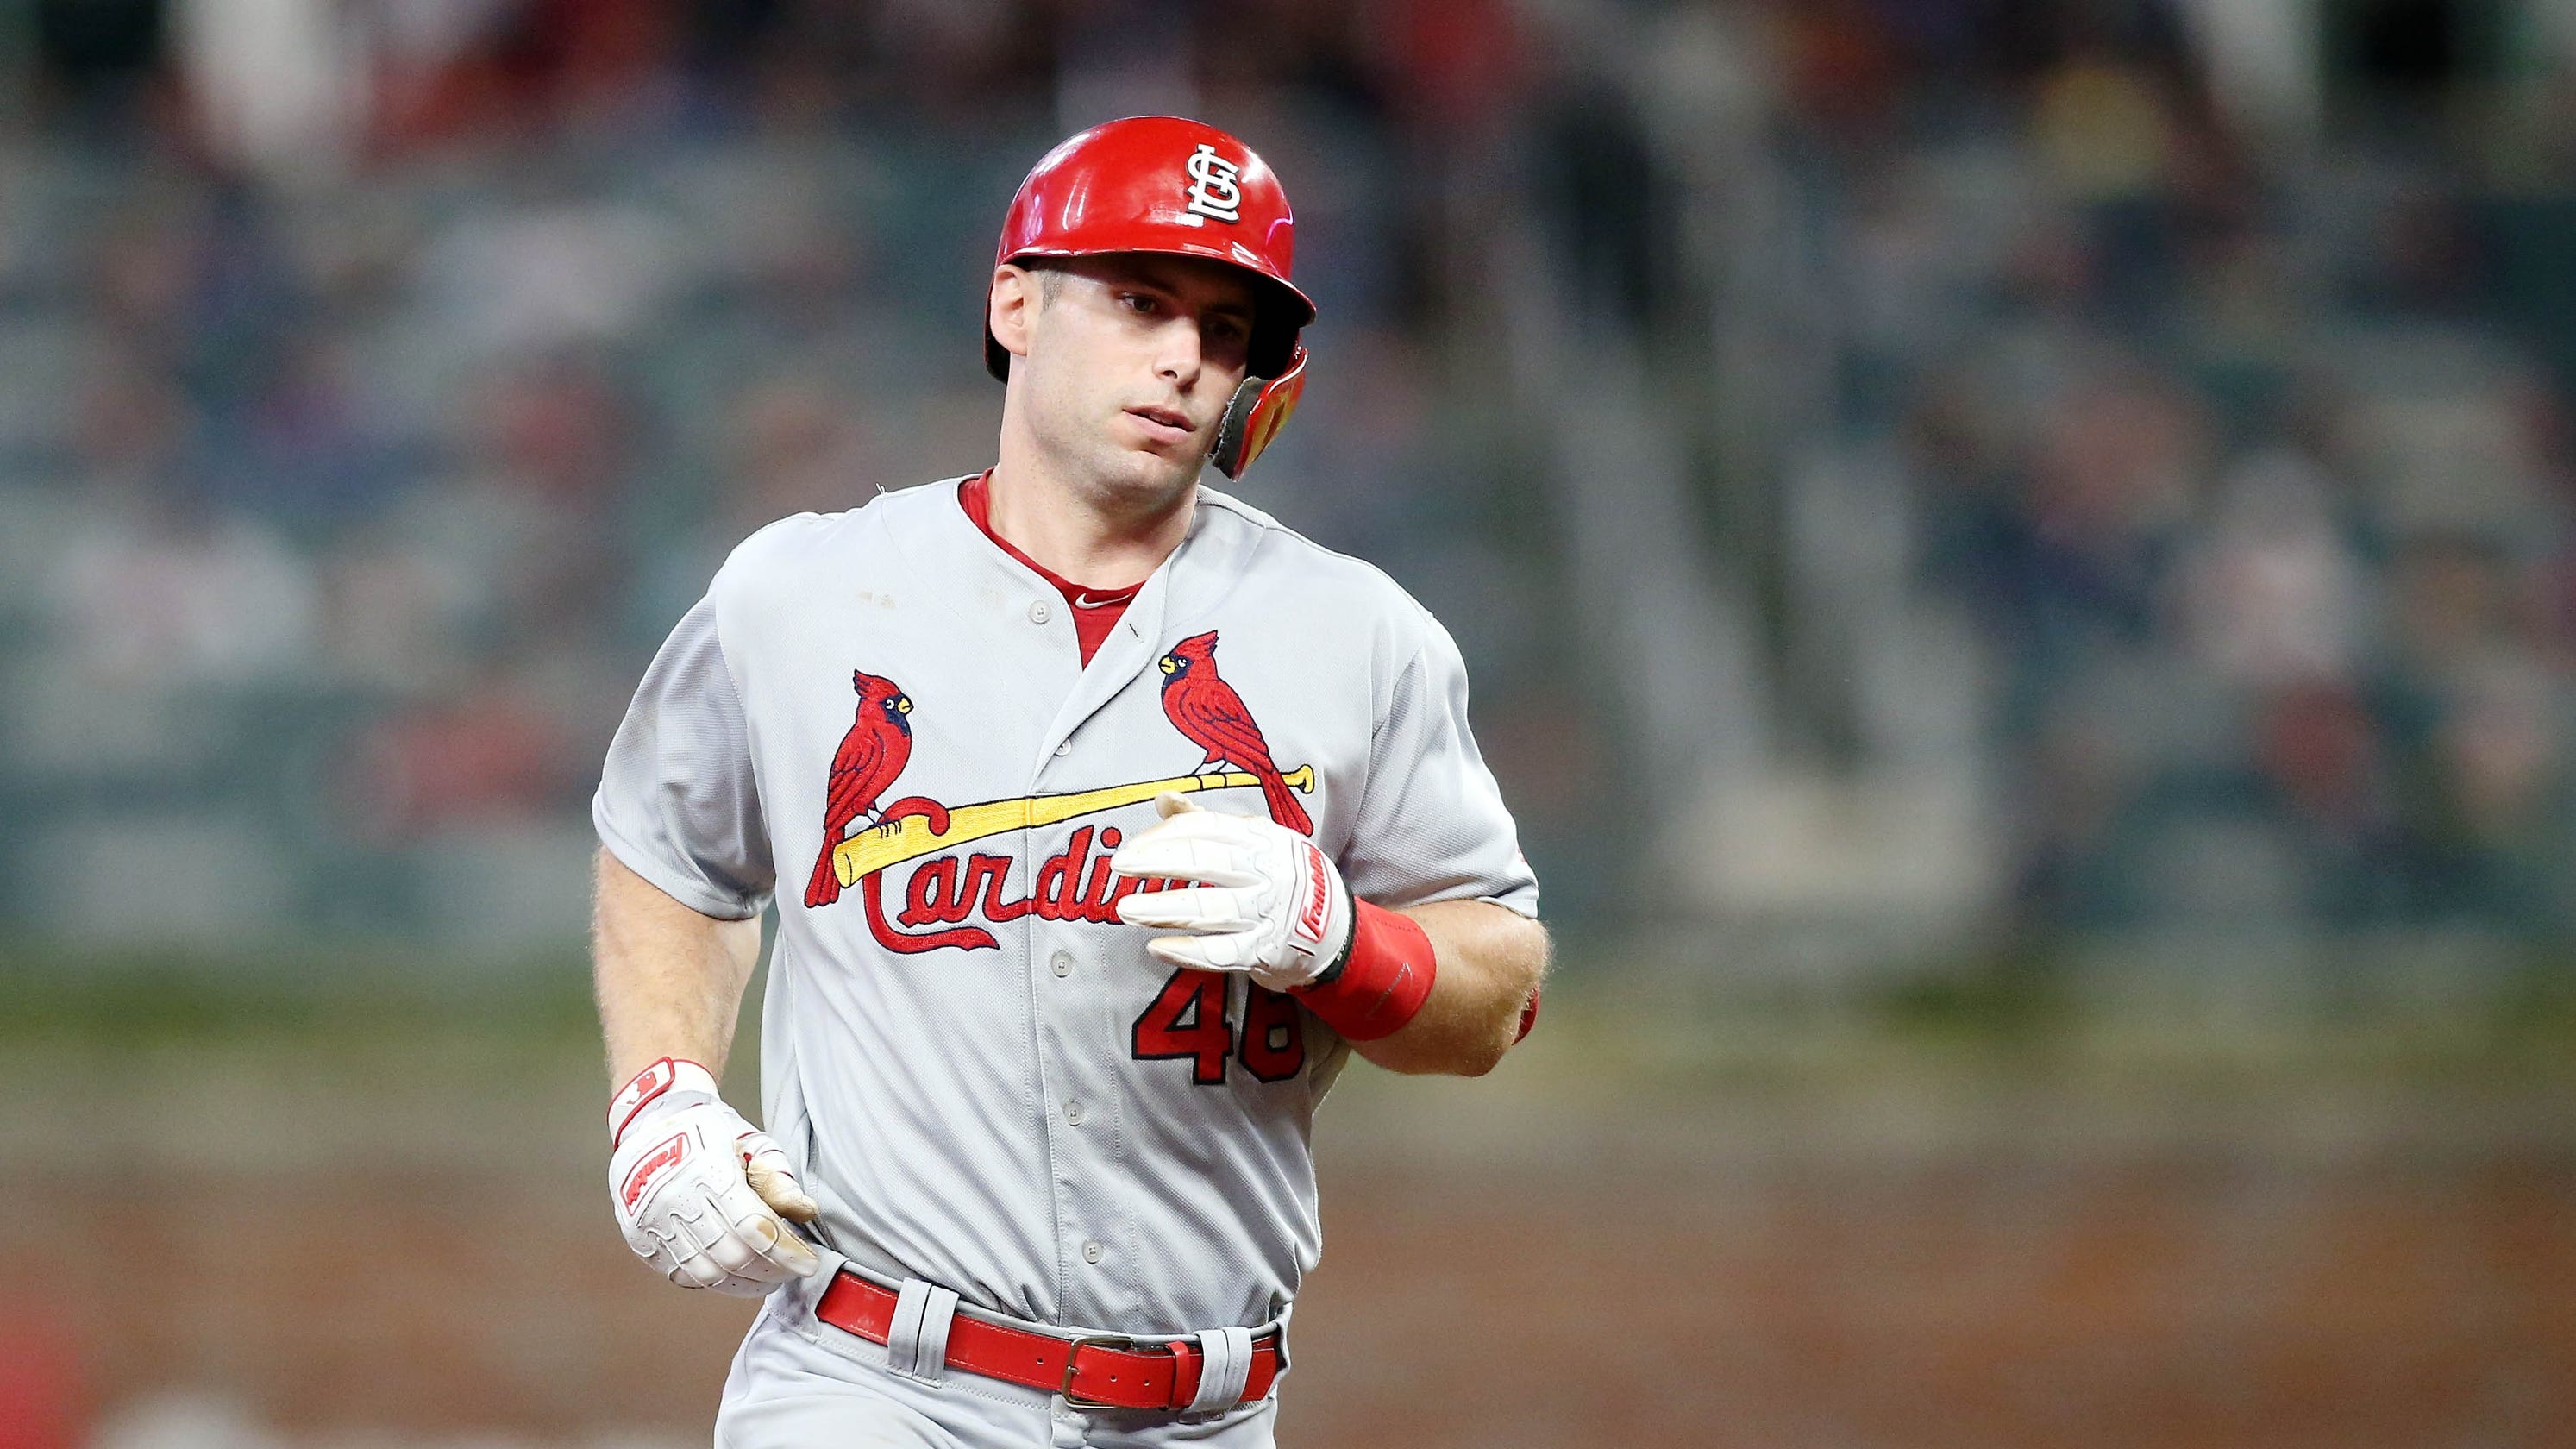 MLB playoffs 2019: Cardinals rally late, top Braves in Game 1 of NLDS